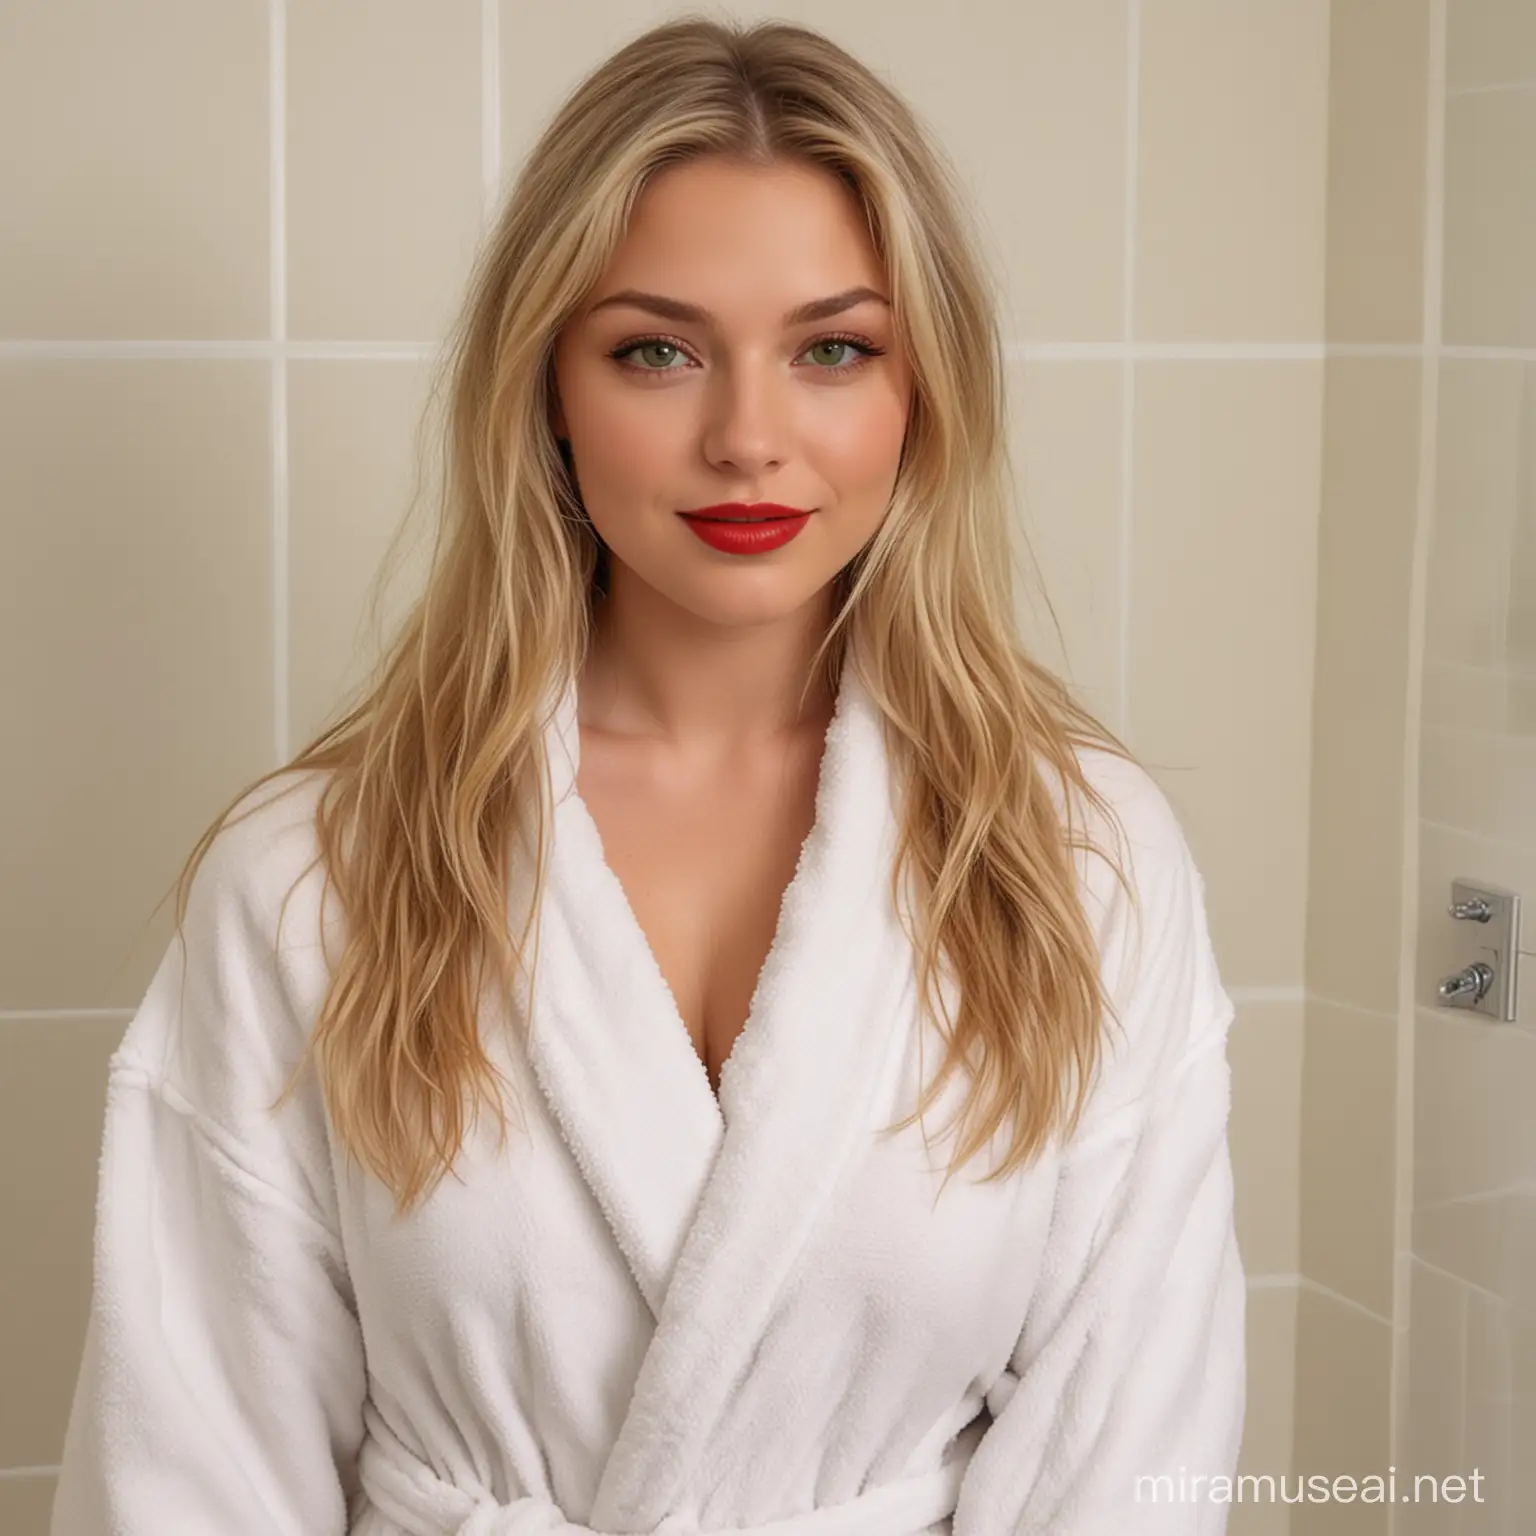 Lucy is a nice blonde female student, mid twenties, long blond hair, attractive face, green eyes, full red lips, marked cheekbones. five feet six inches tall, full young bosom. Measurement 38-24-36. She is stark naked holding her white fluffy bathrobe in her hand while tanding in the bathroom 